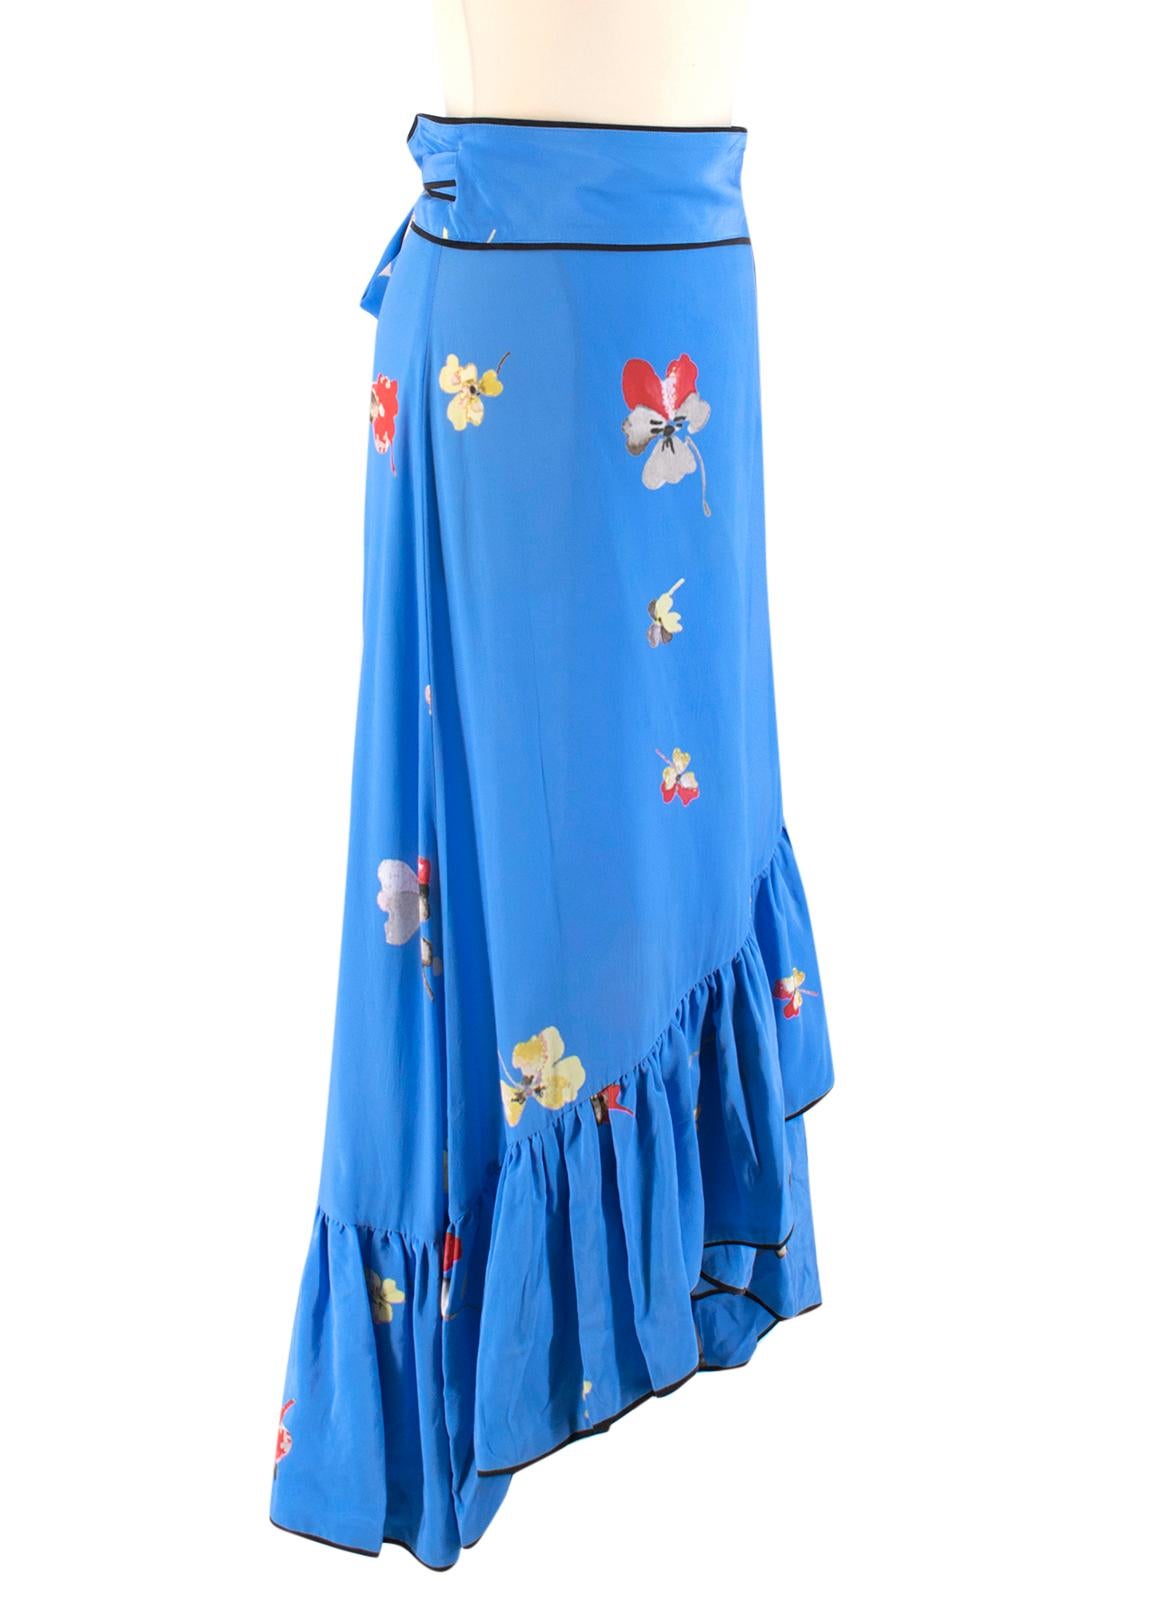 Ganni Blue Silk Floral Printed Joycedale Wrap Skirt

- Finely Floral pattern print dress fitted for every season wear.
- Wrapped skirt 
- 100% Silk
- Thin black line strip at the end of skirt

Please note, these items are pre-owned and may show some